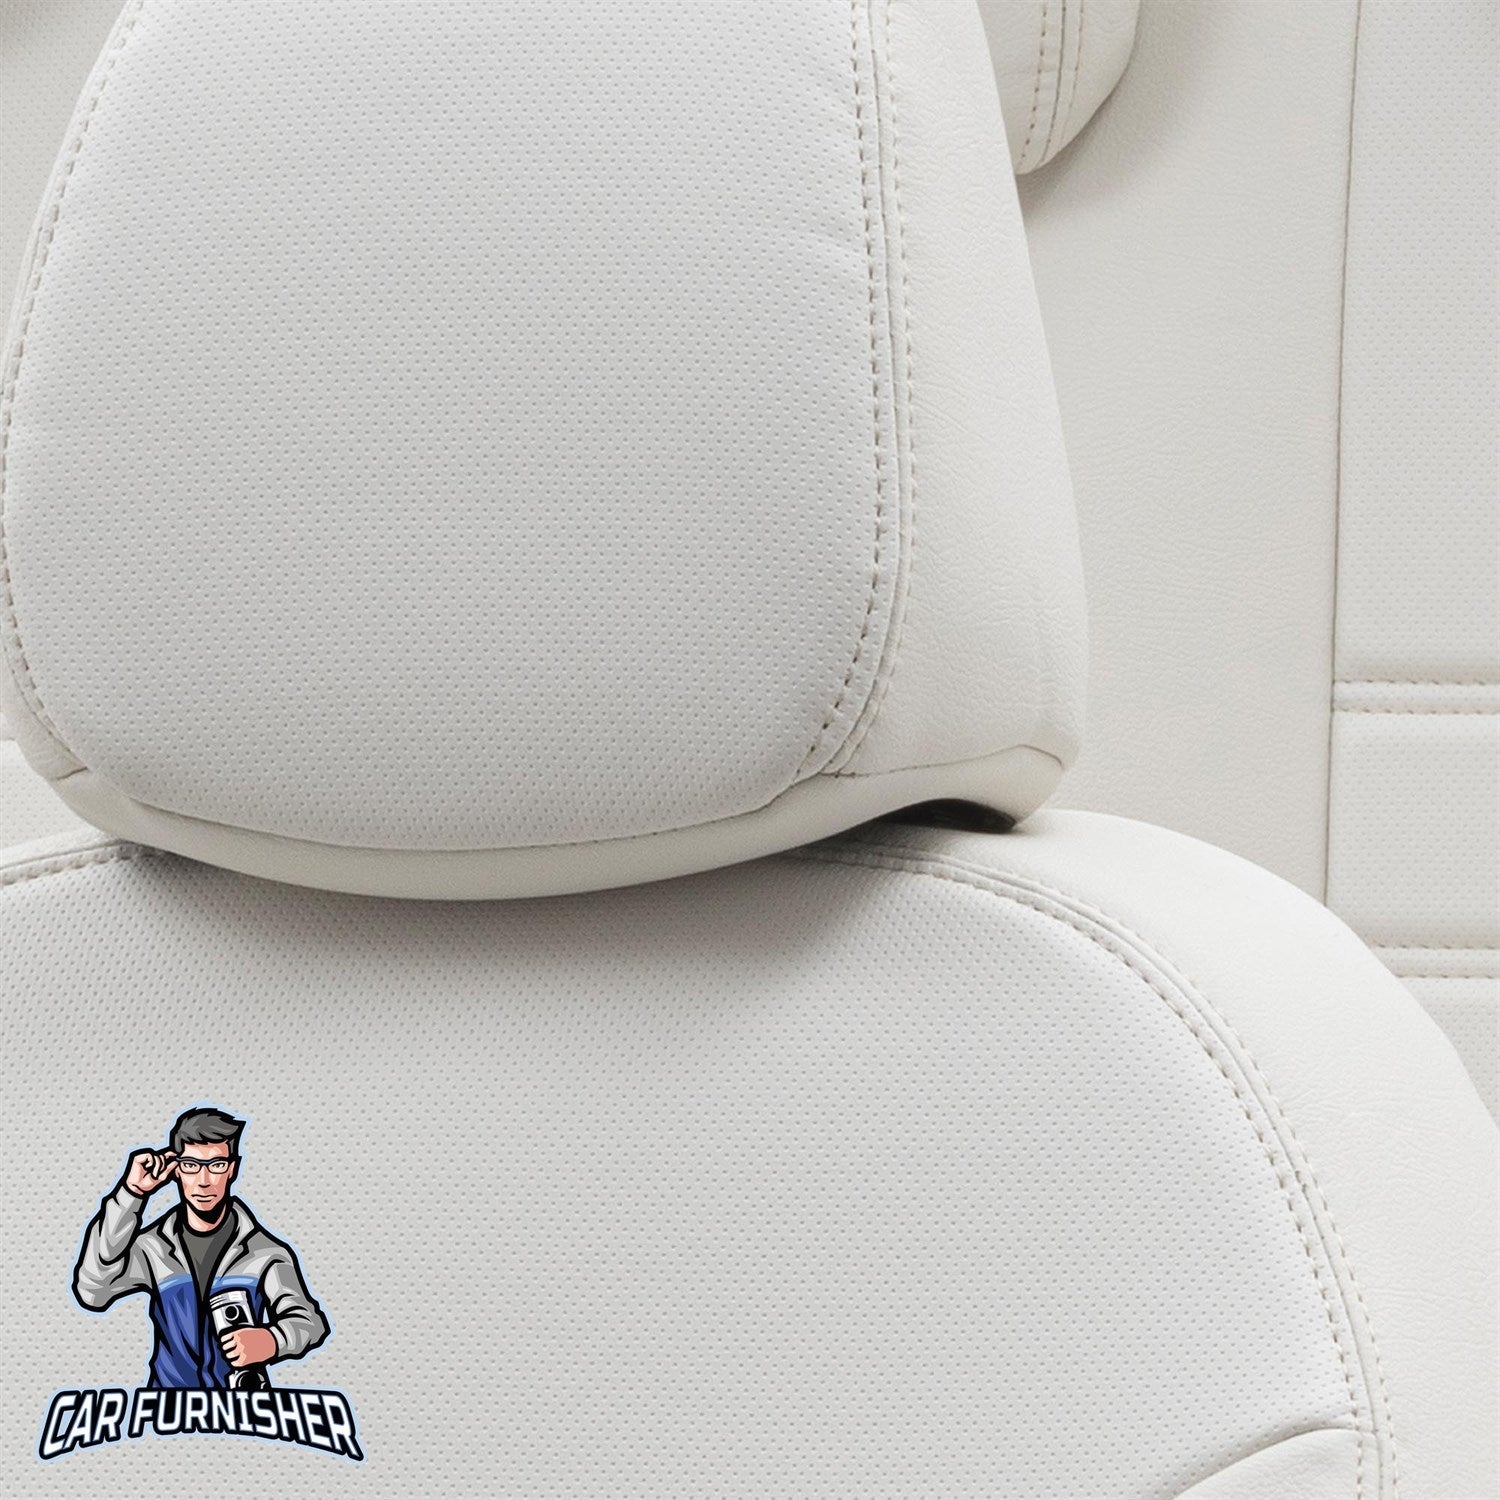 Citroen Jumper Seat Covers Istanbul Leather Design Ivory Leather